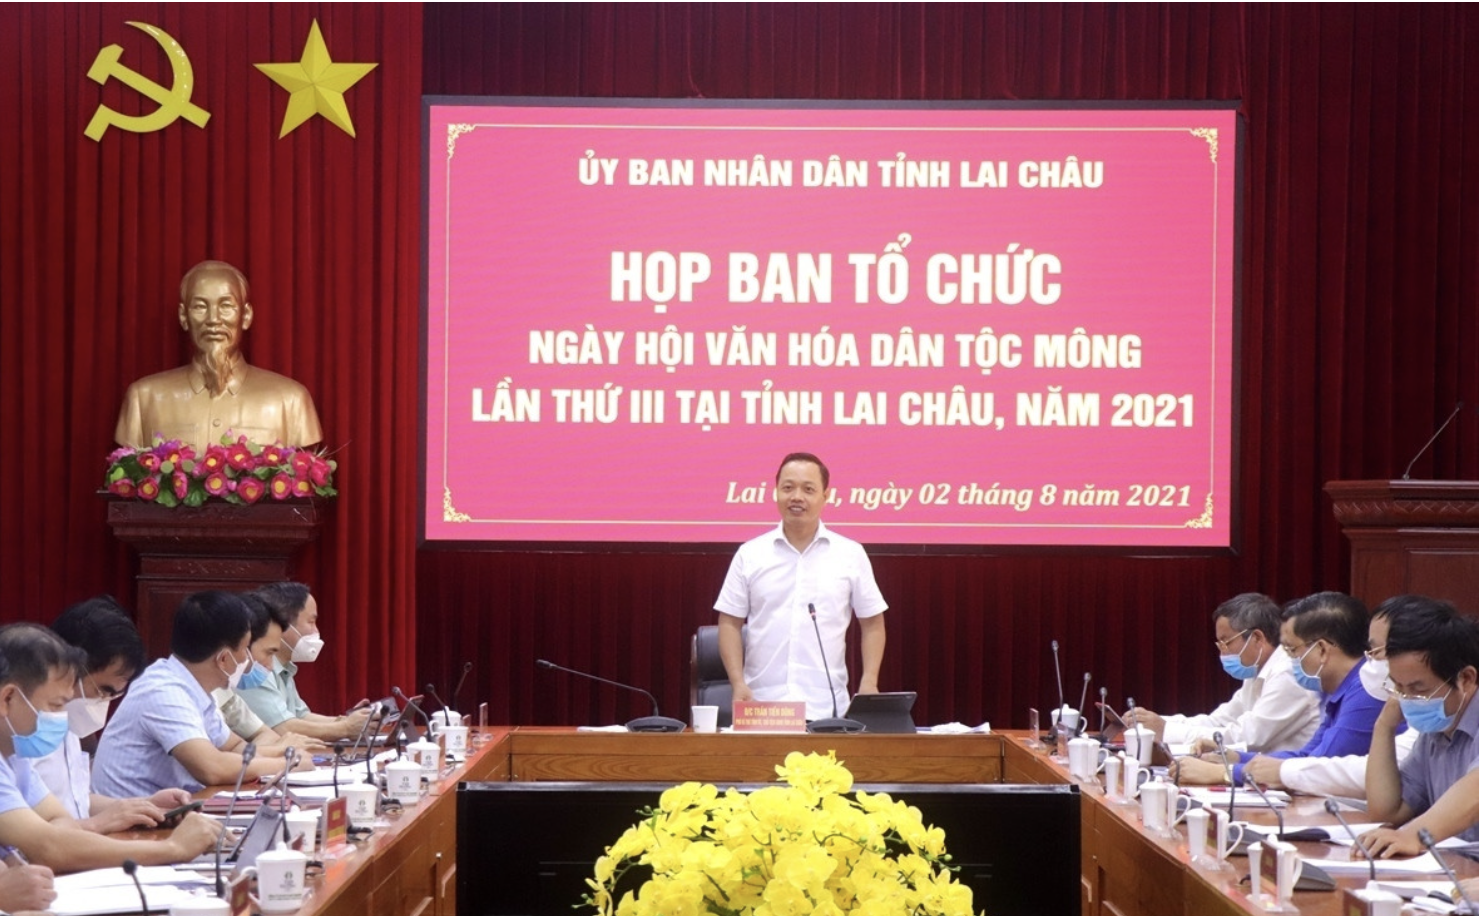 anh man hinh 2023 10 24 luc 160920.png